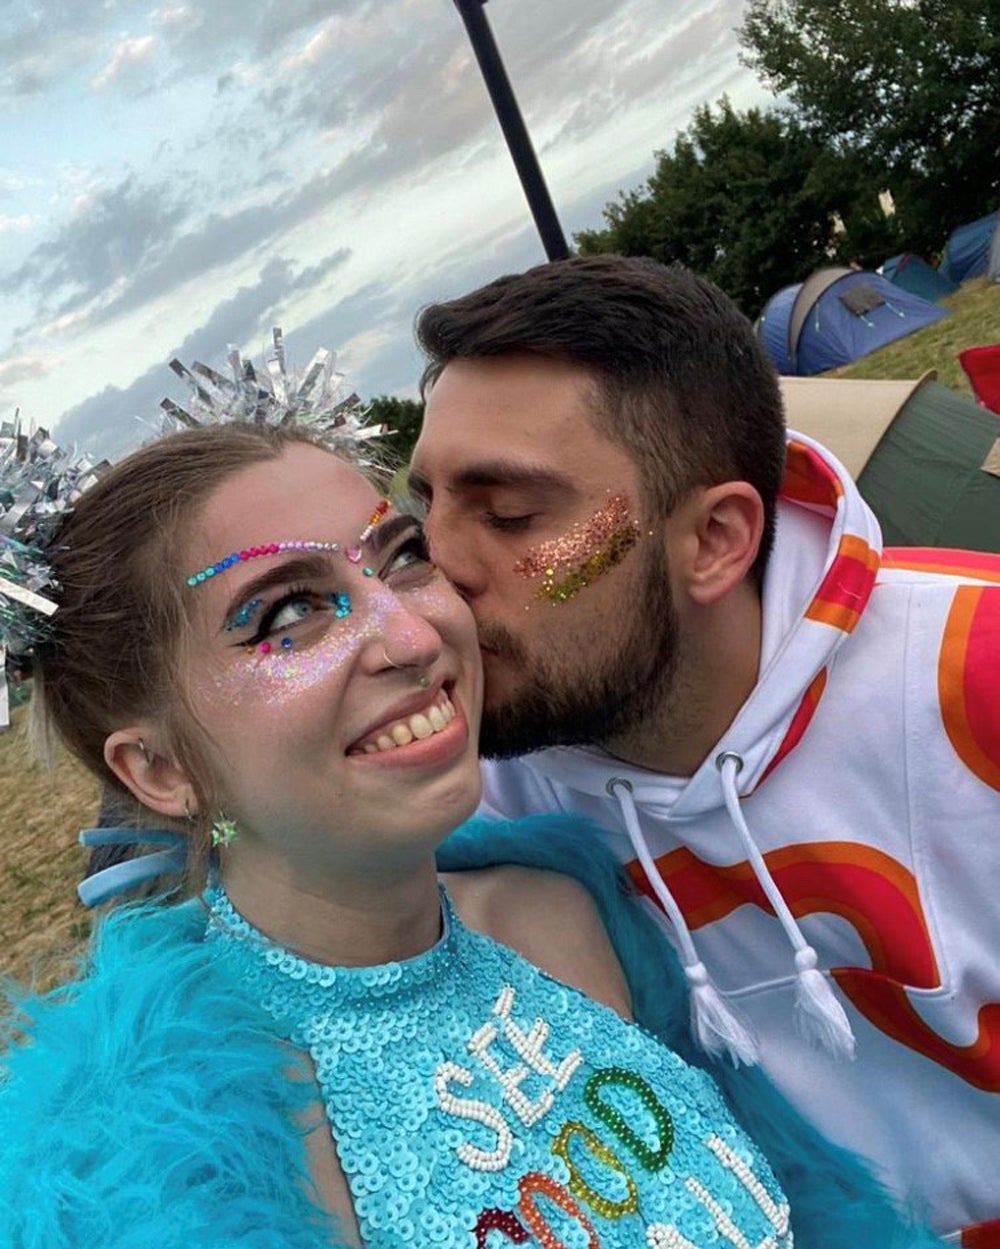 Sophie Anderson, 24, with her boyfriend, Alex, who has supported her at every step (Collect/PA Real Life)